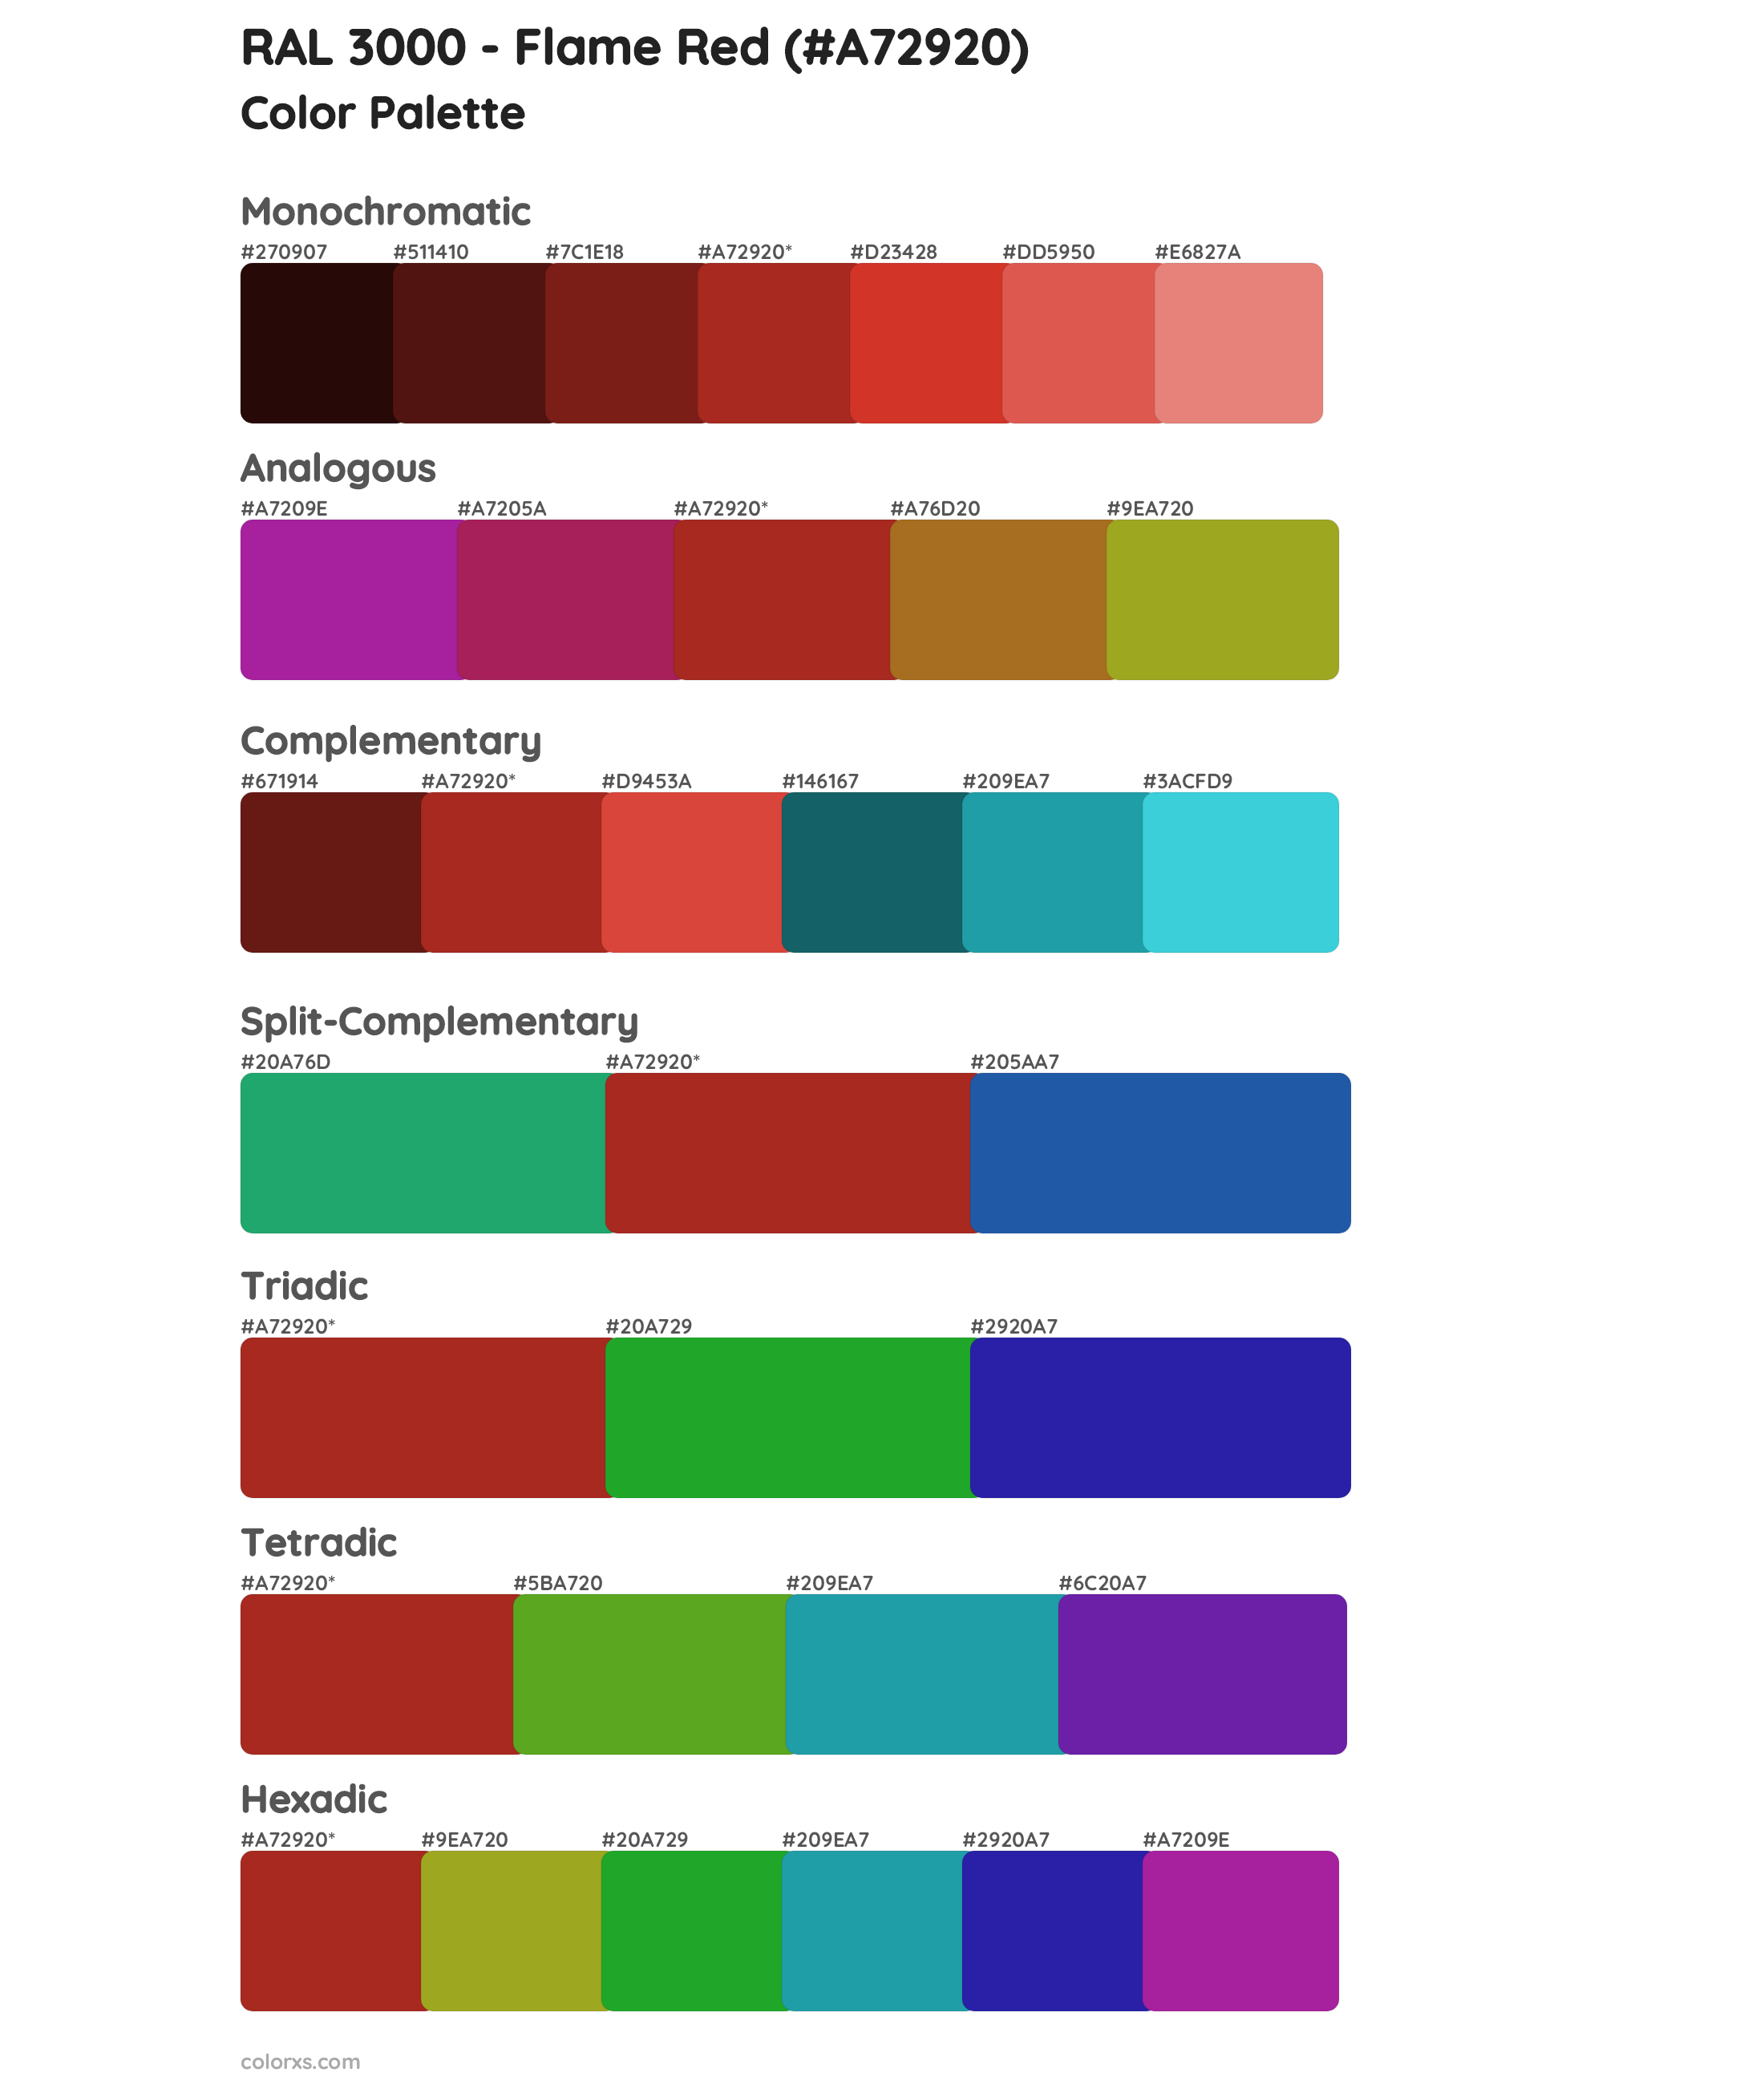 RAL 3000 - Flame Red Color Scheme Palettes